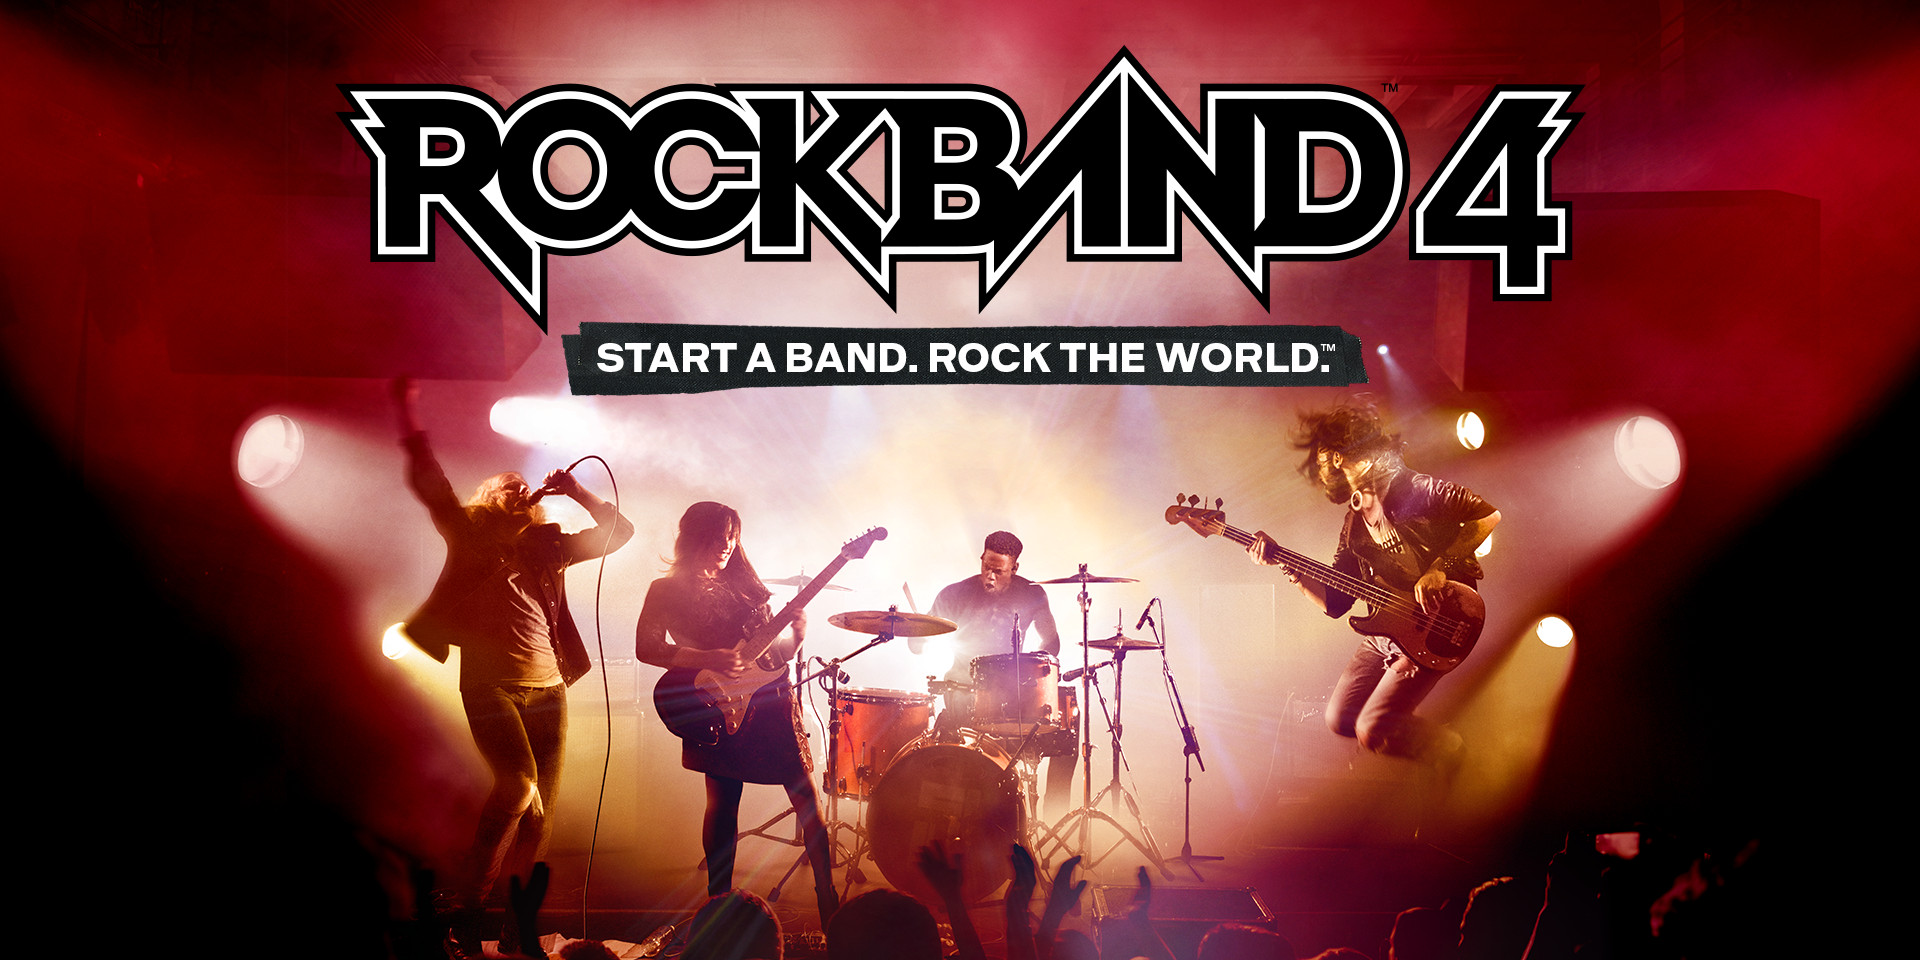 Review Rock Band 4 makes an old favorite come alive with refreshed